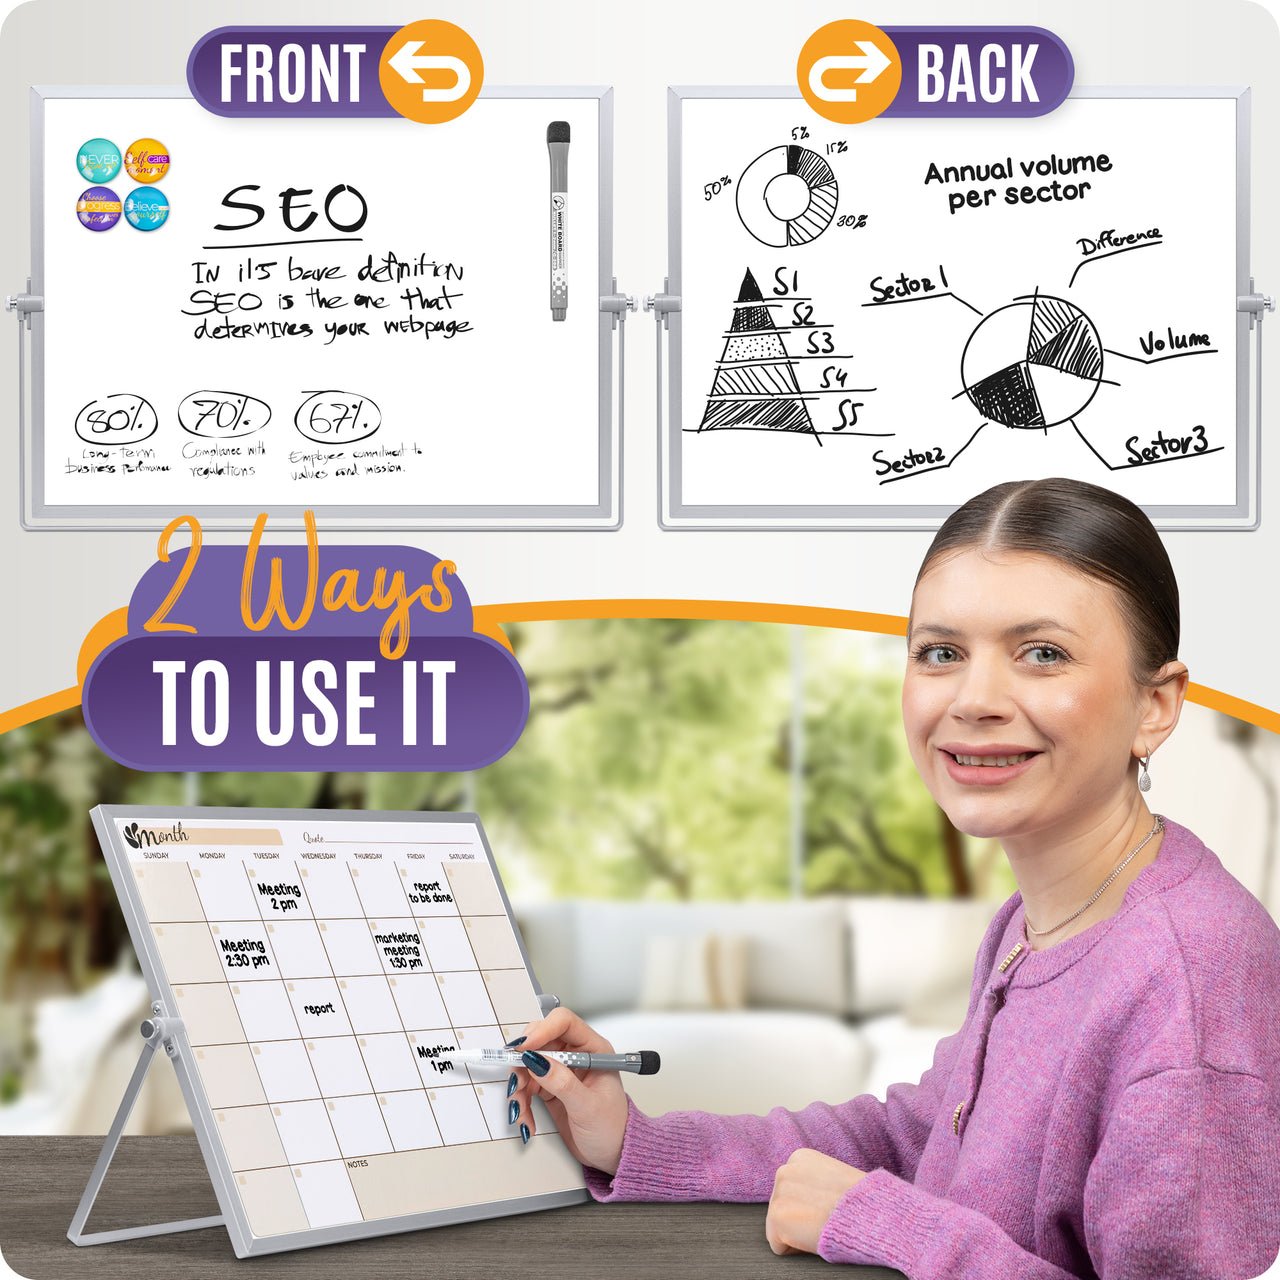 Siantell Silver Magnetic White Board with Stand for Desktop